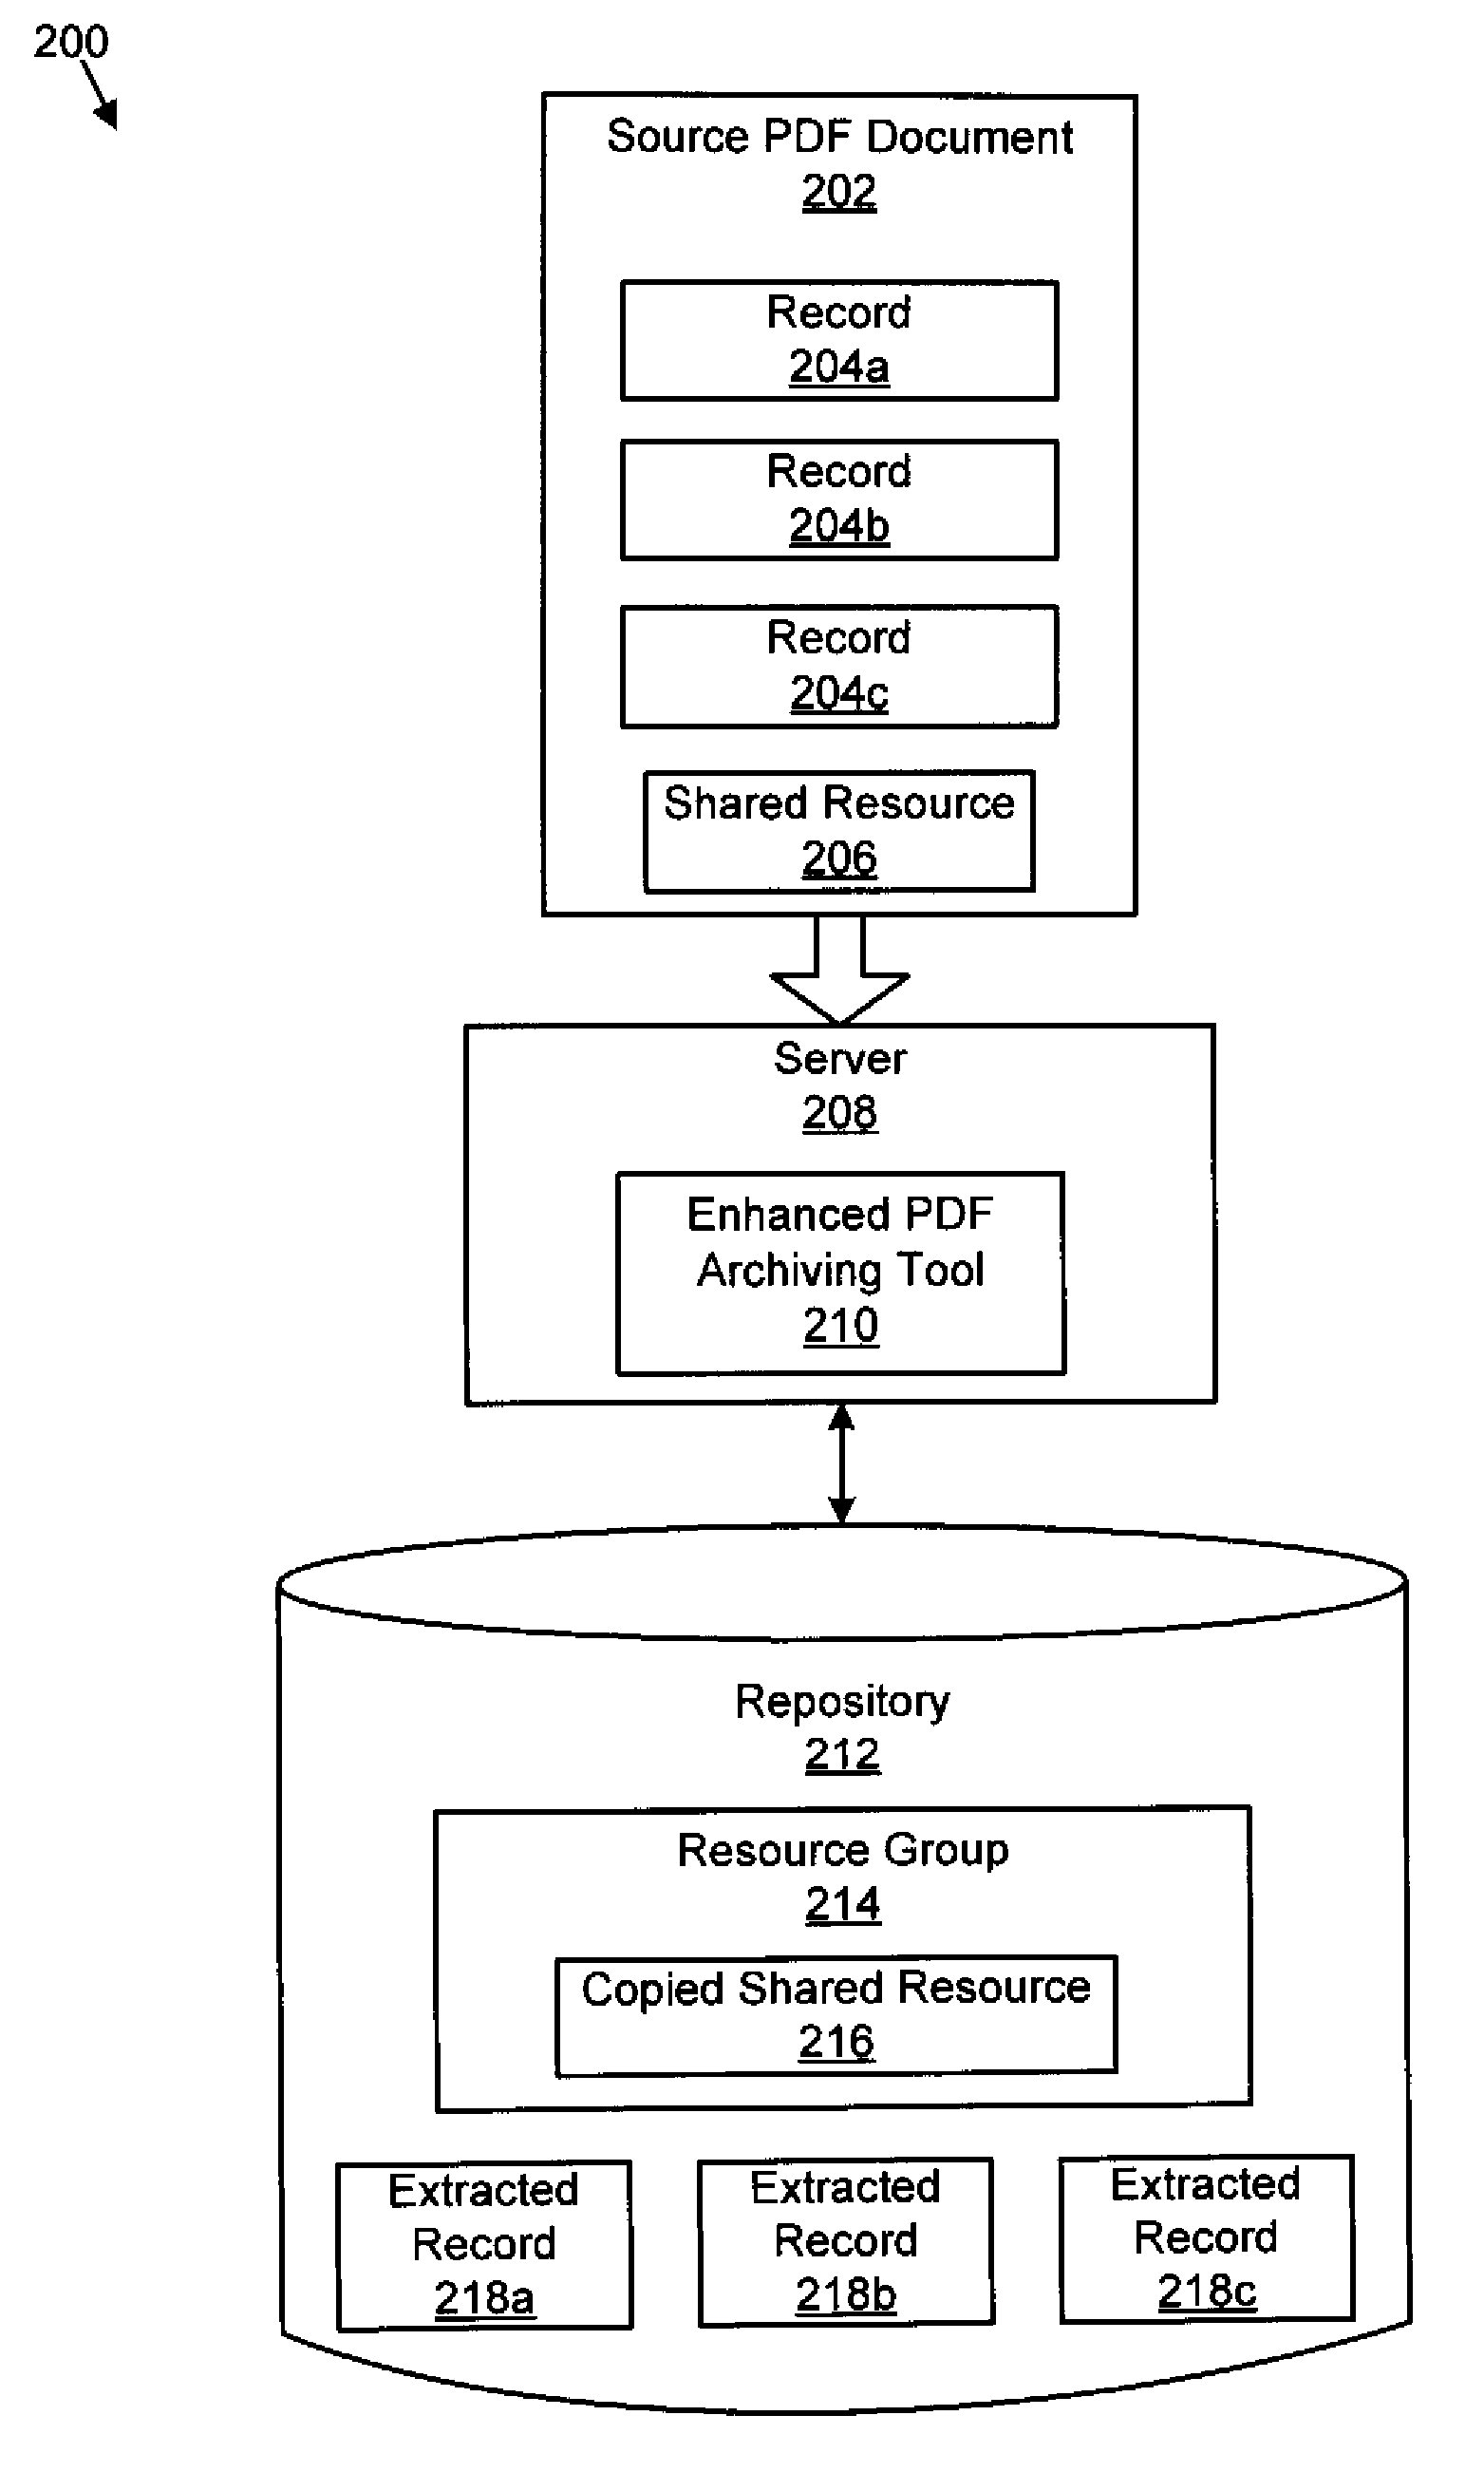 Apparatus, system, and method for improved portable document format ("pdf") document archiving